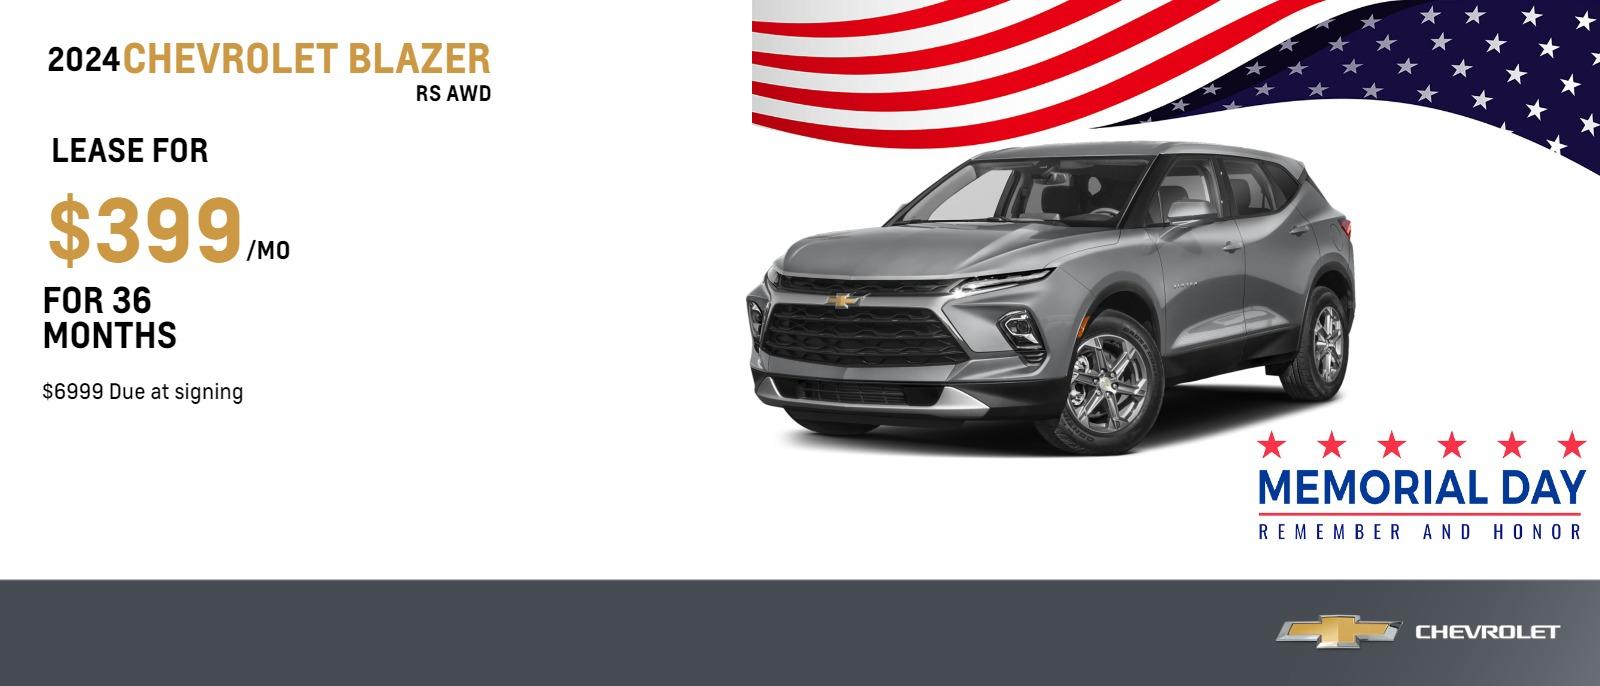 2024 Chevrolet Blazer RS AWD

$399 Month Lease | 36 Months | $6999 Due at signing